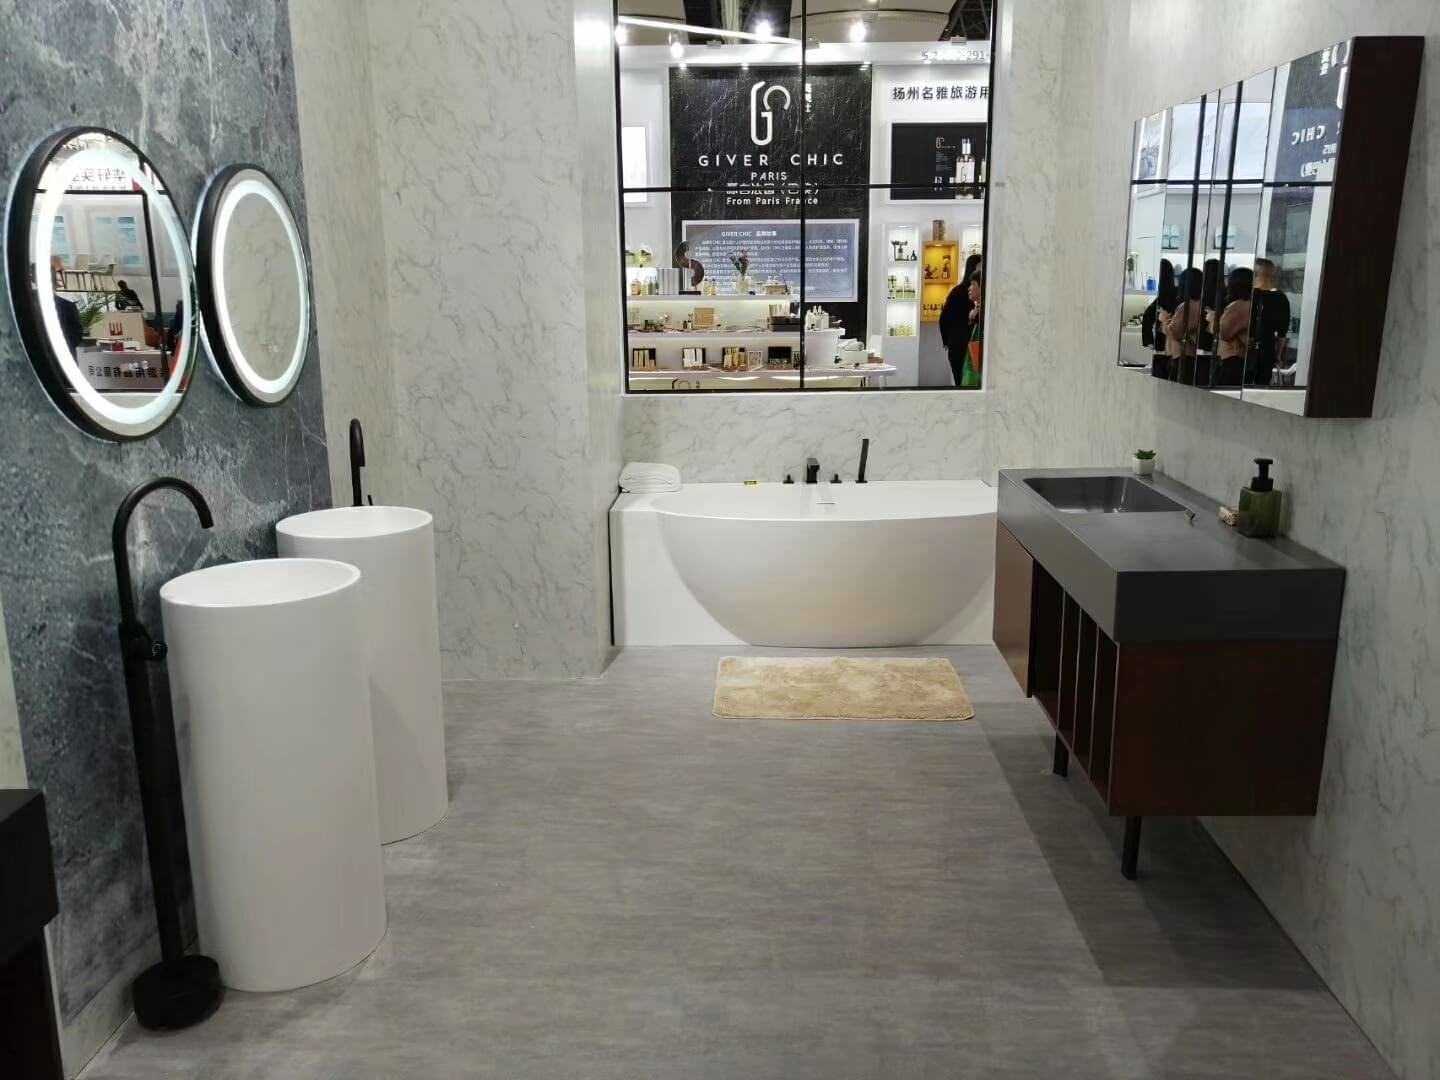 2019 Guangzhou Hotel Fair from Cpingao basin with cabinet and bathtub